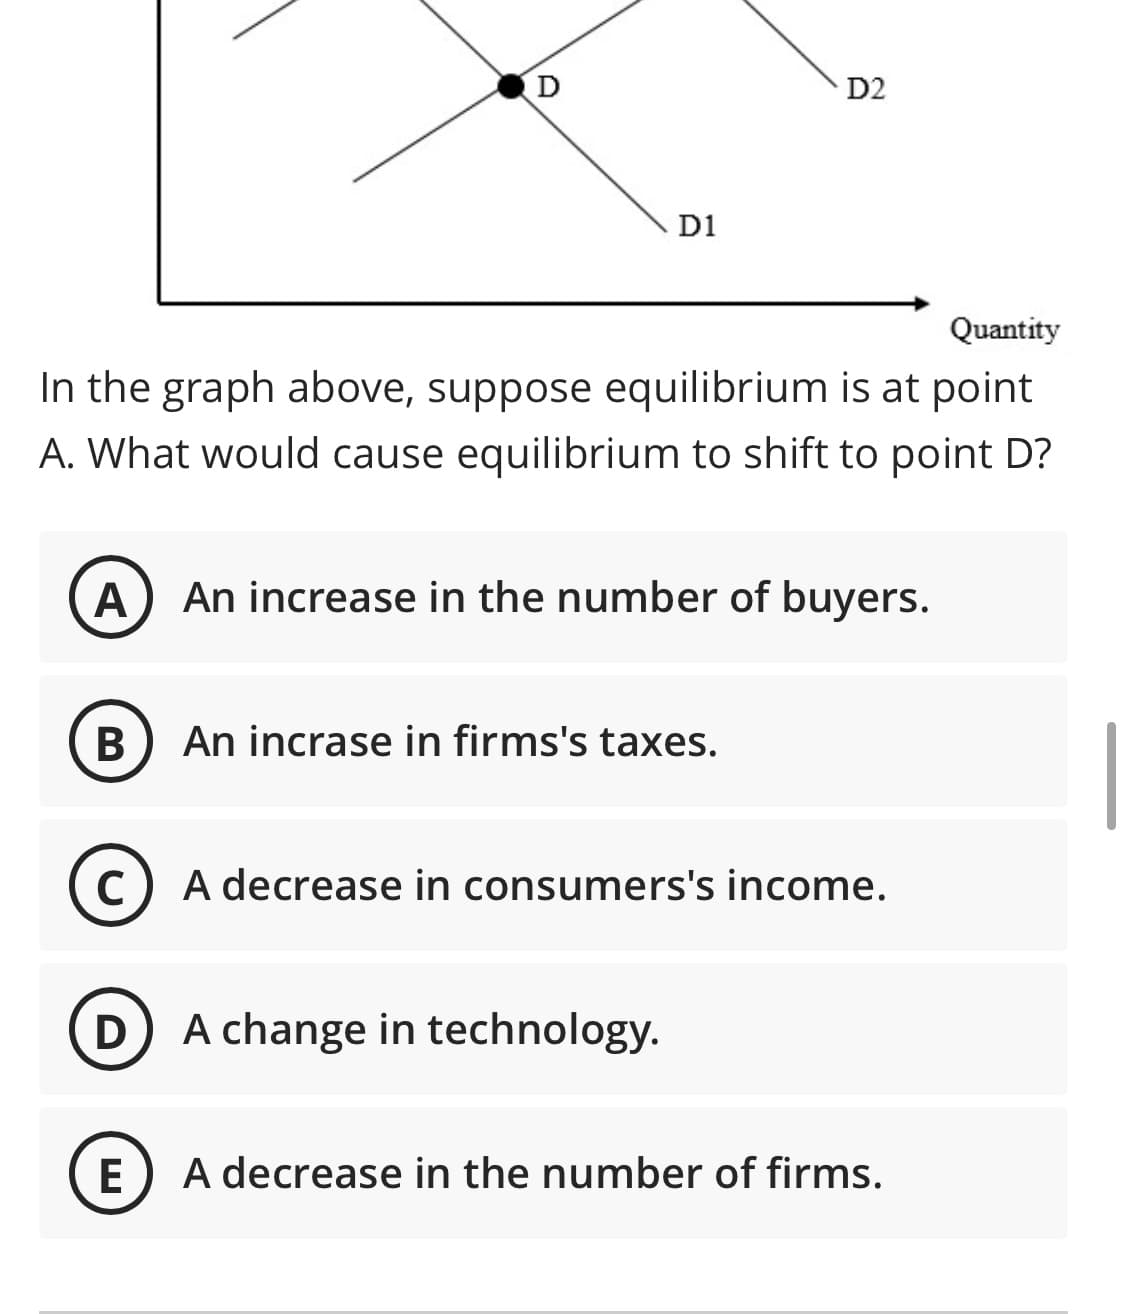 D
D2
D1
Quantity
In the graph above, suppose equilibrium is at point
A. What would cause equilibrium to shift to point D?
A
An increase in the number of buyers.
An incrase in firms's taxes.
(c) A decrease in consumers's income.
C
(D A change in technology.
E
A decrease in the number of firms.
